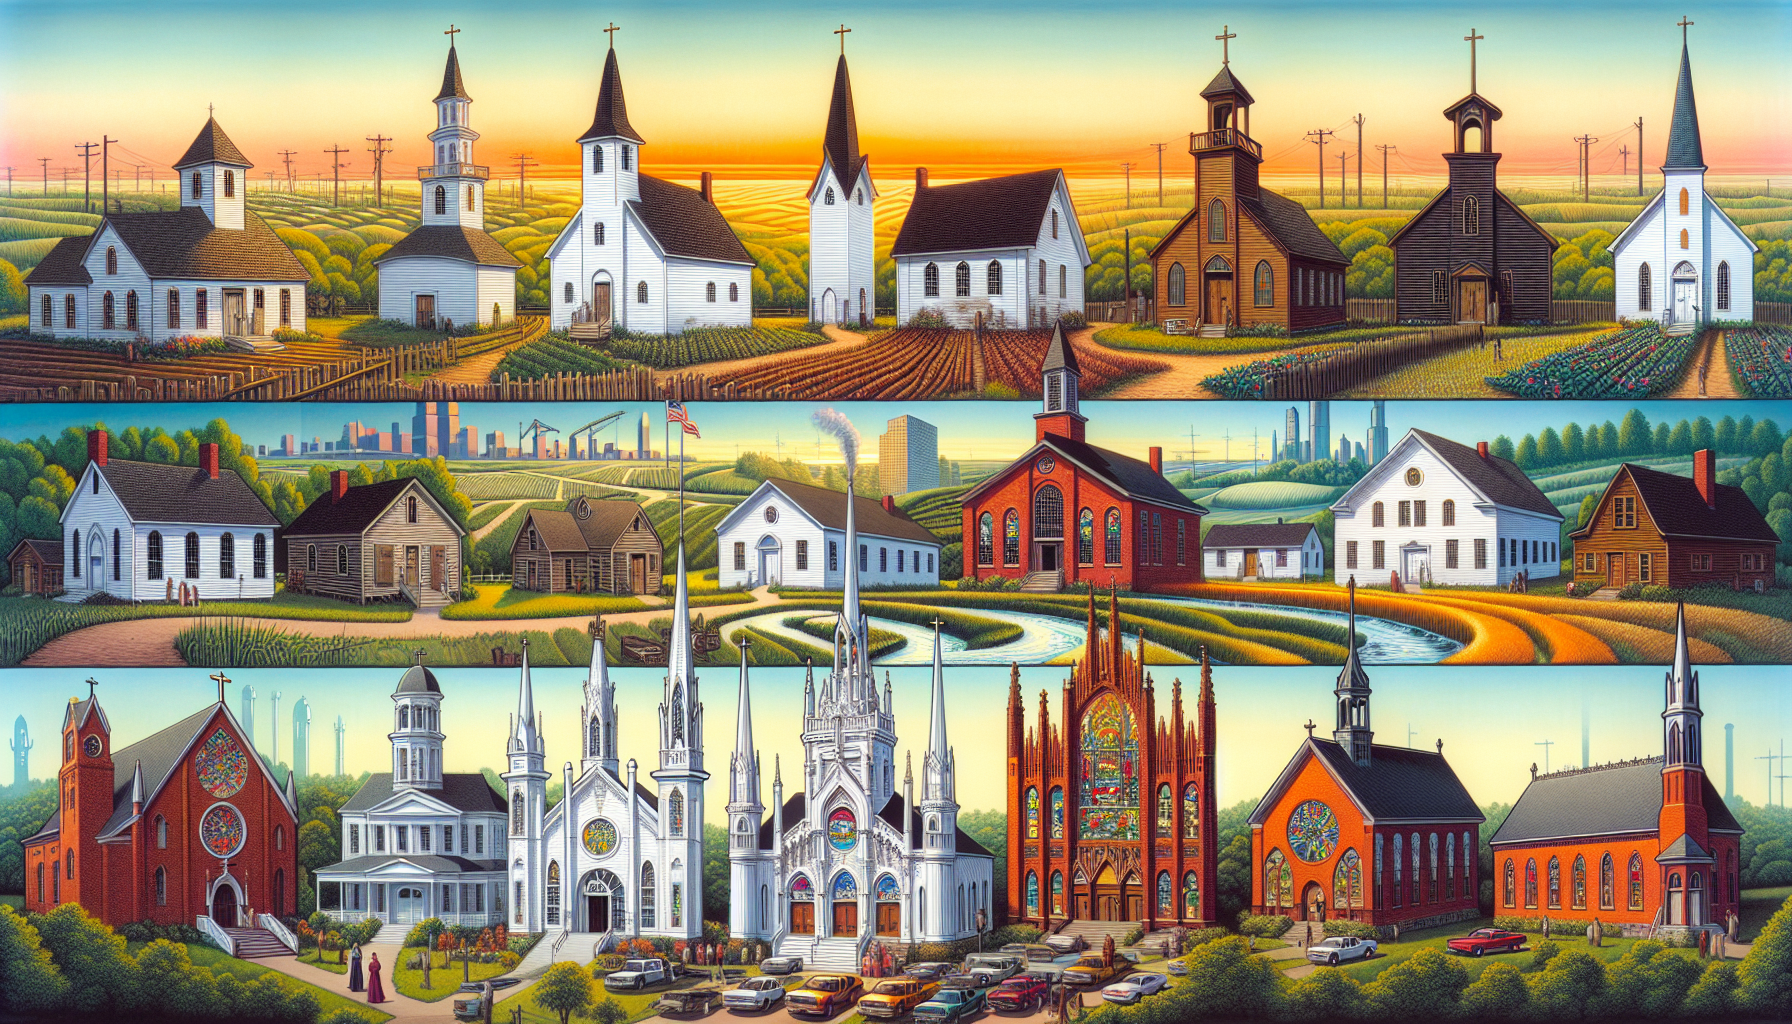 Create an intricate and historical illustration capturing the origin and evolution of Christian churches in the United States. The image should include diverse architectural designs of churches from t